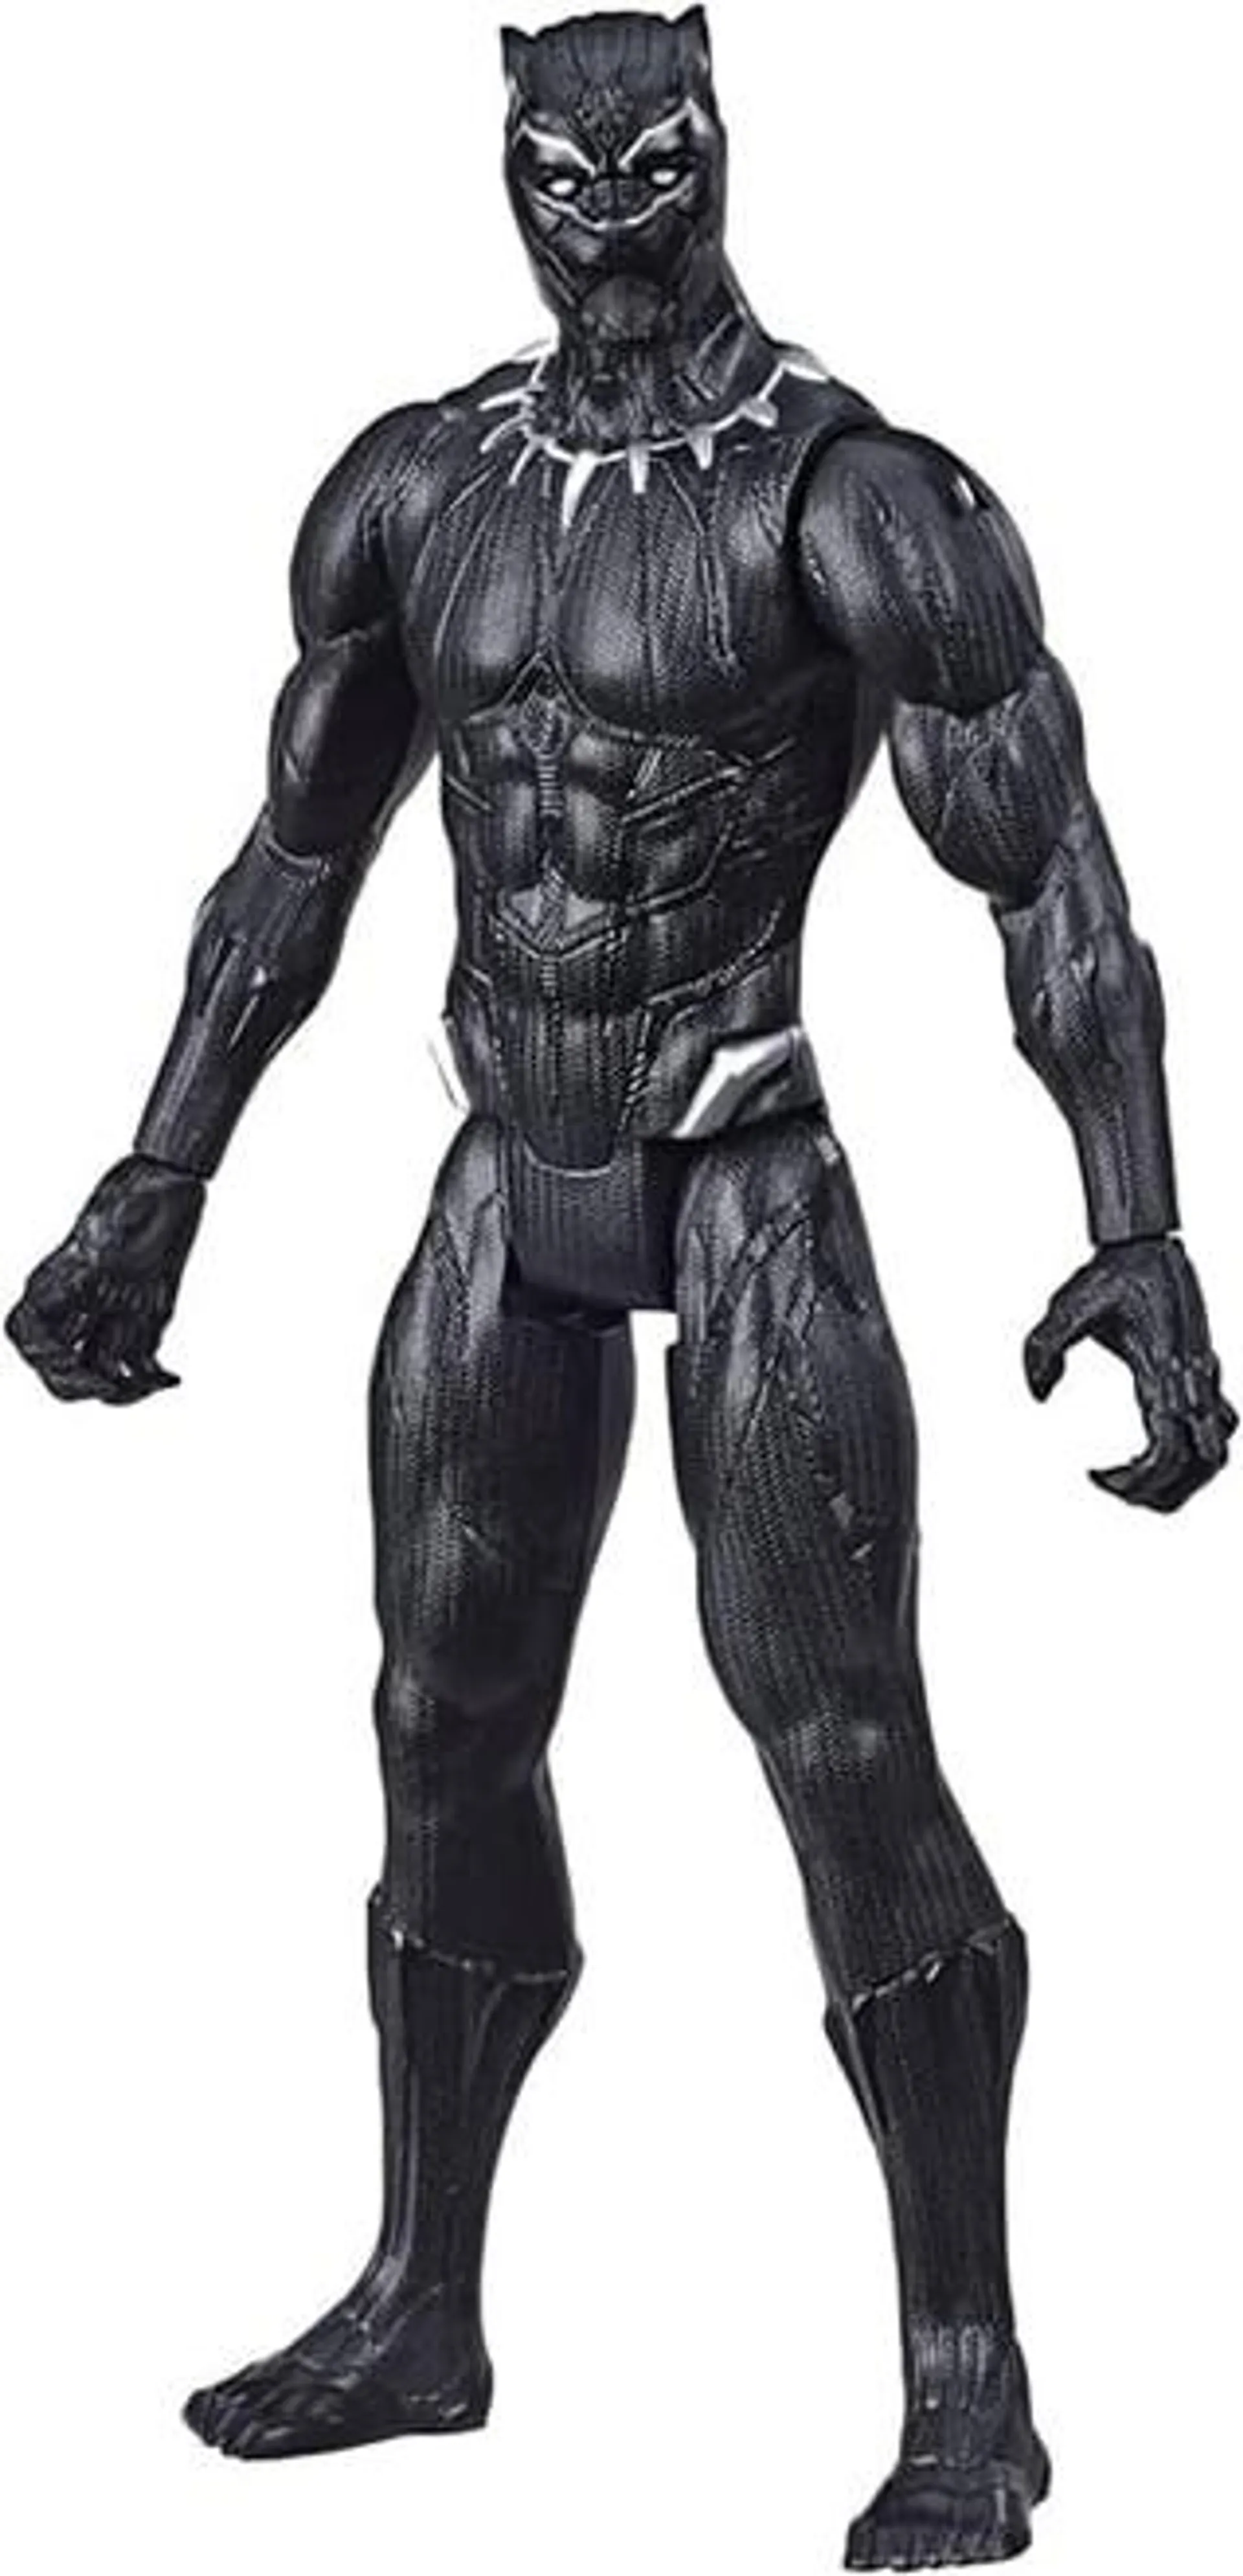 Marvel Titan Hero Series Black Panther Action Figure, 12-Inch Toy